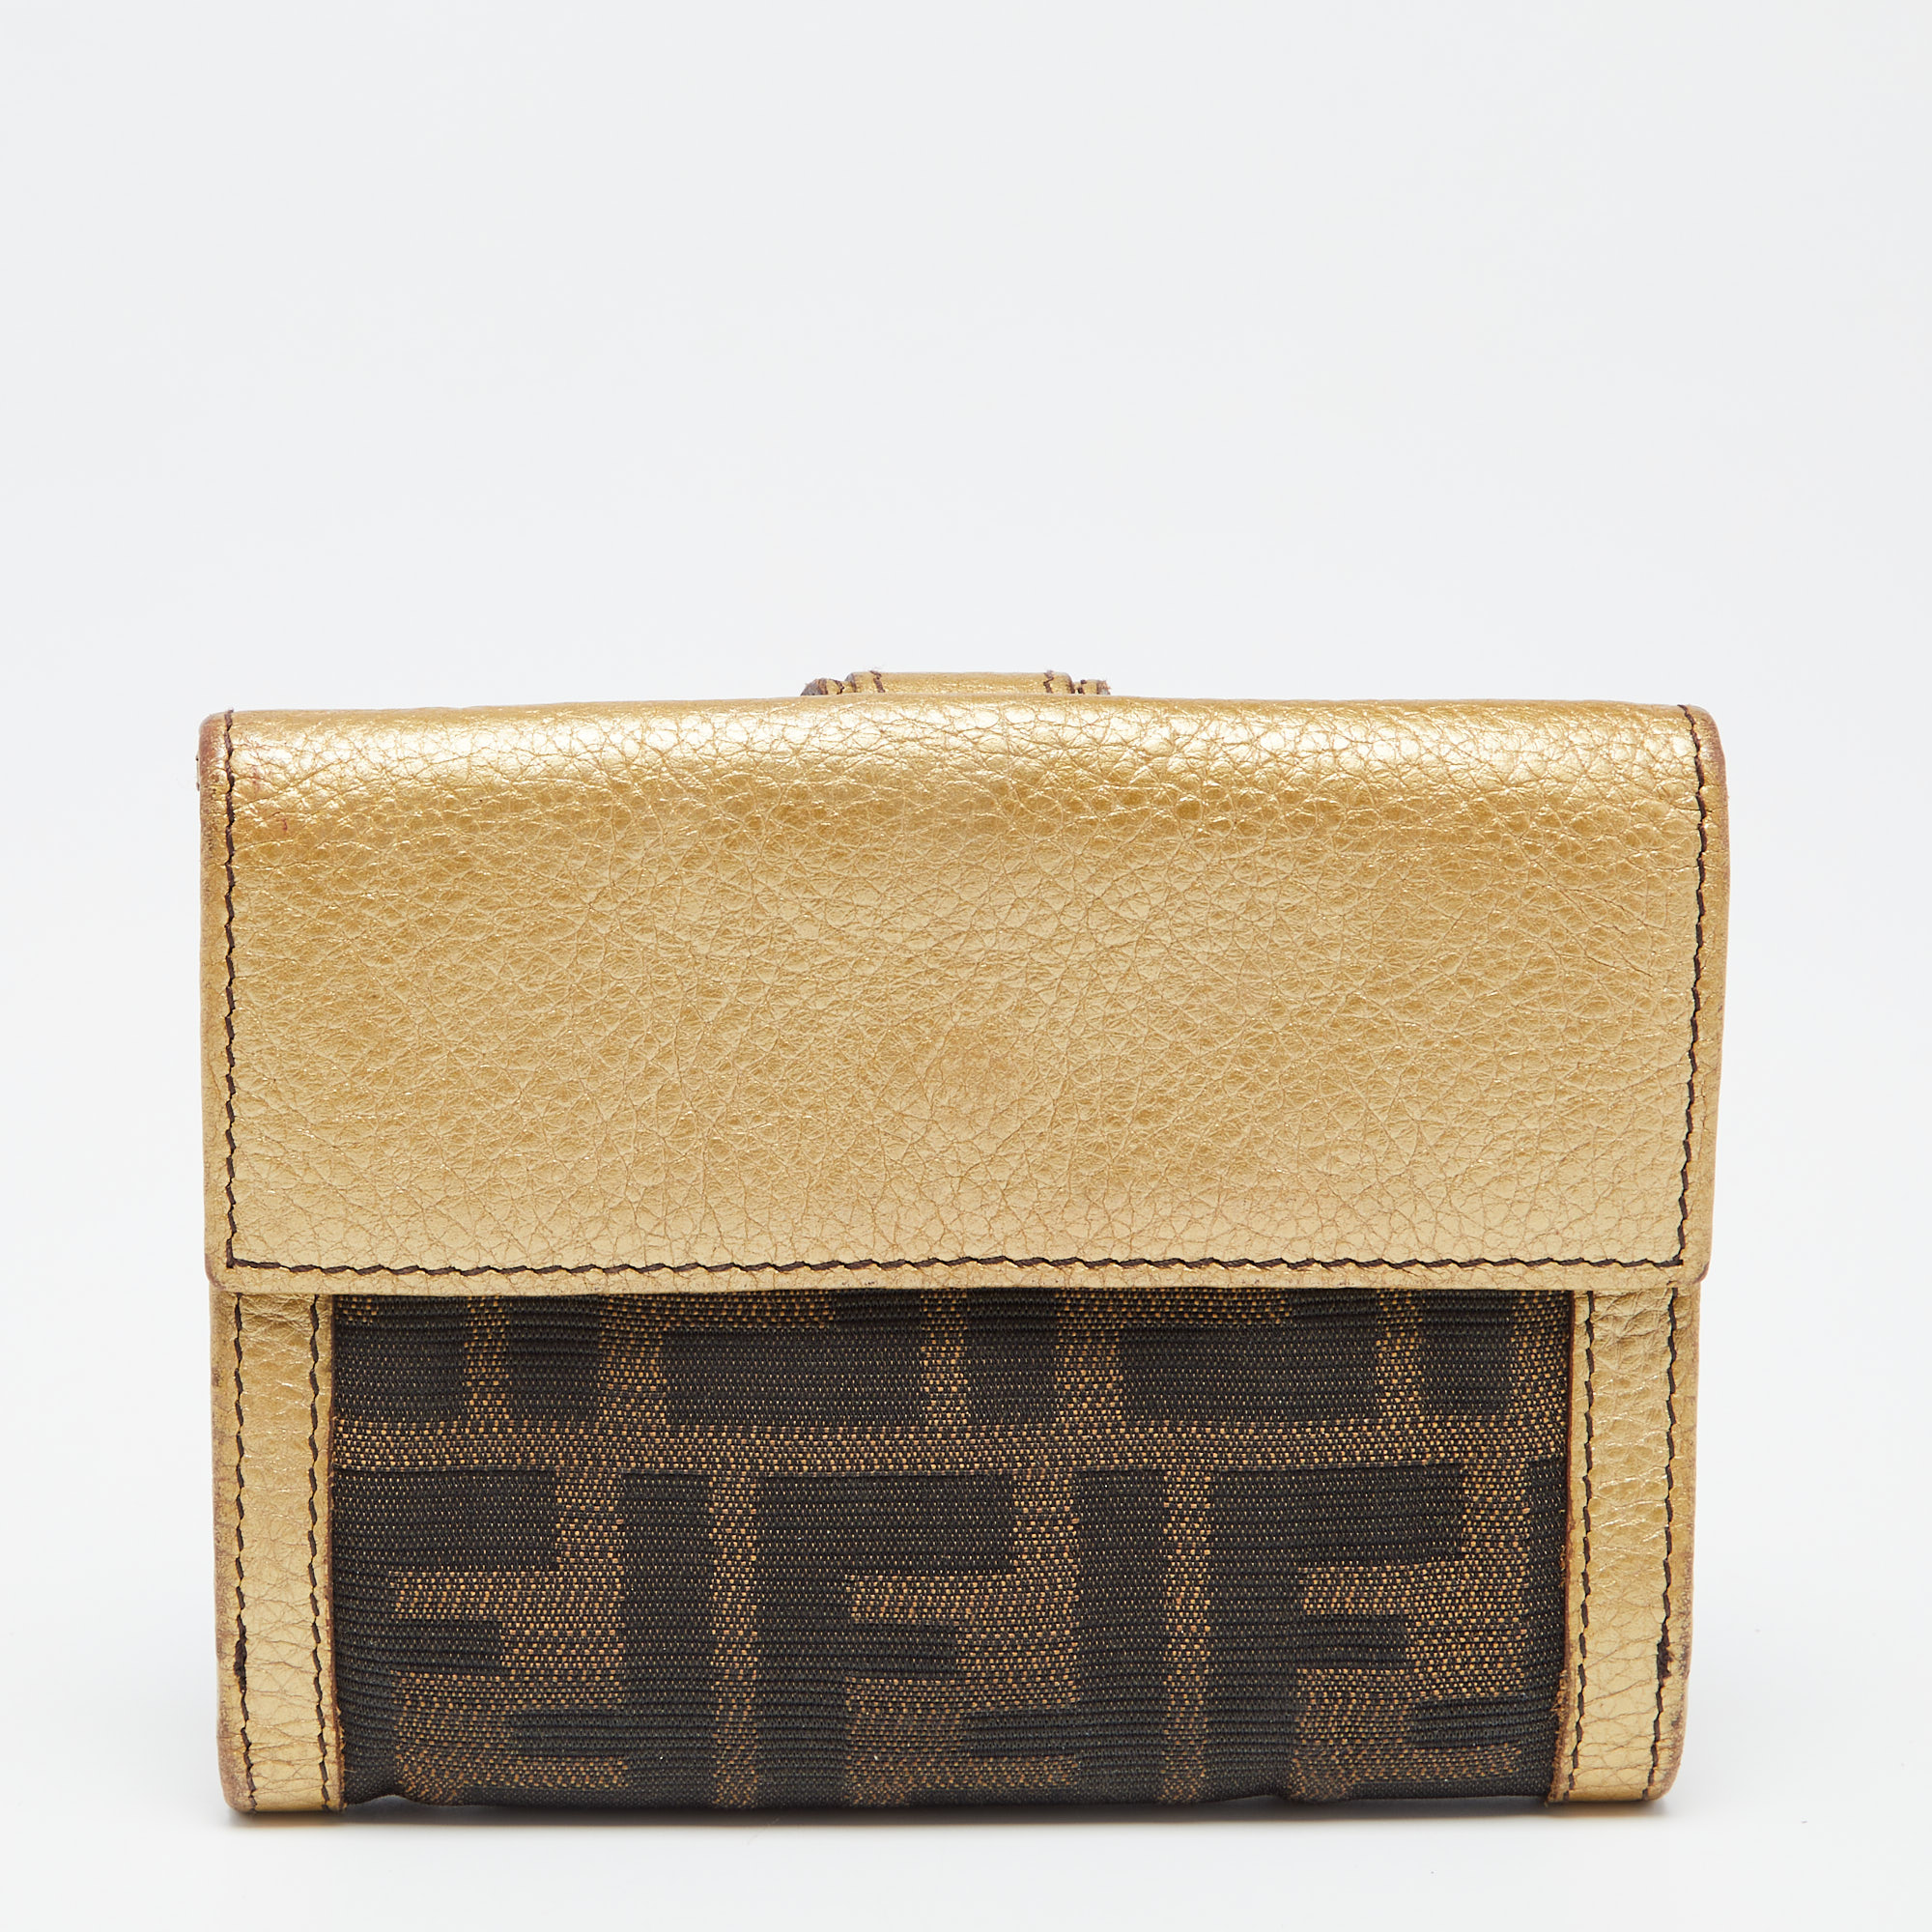 Fendi Tobacco/Gold Zucca Canvas And Leather French Compact Wallet